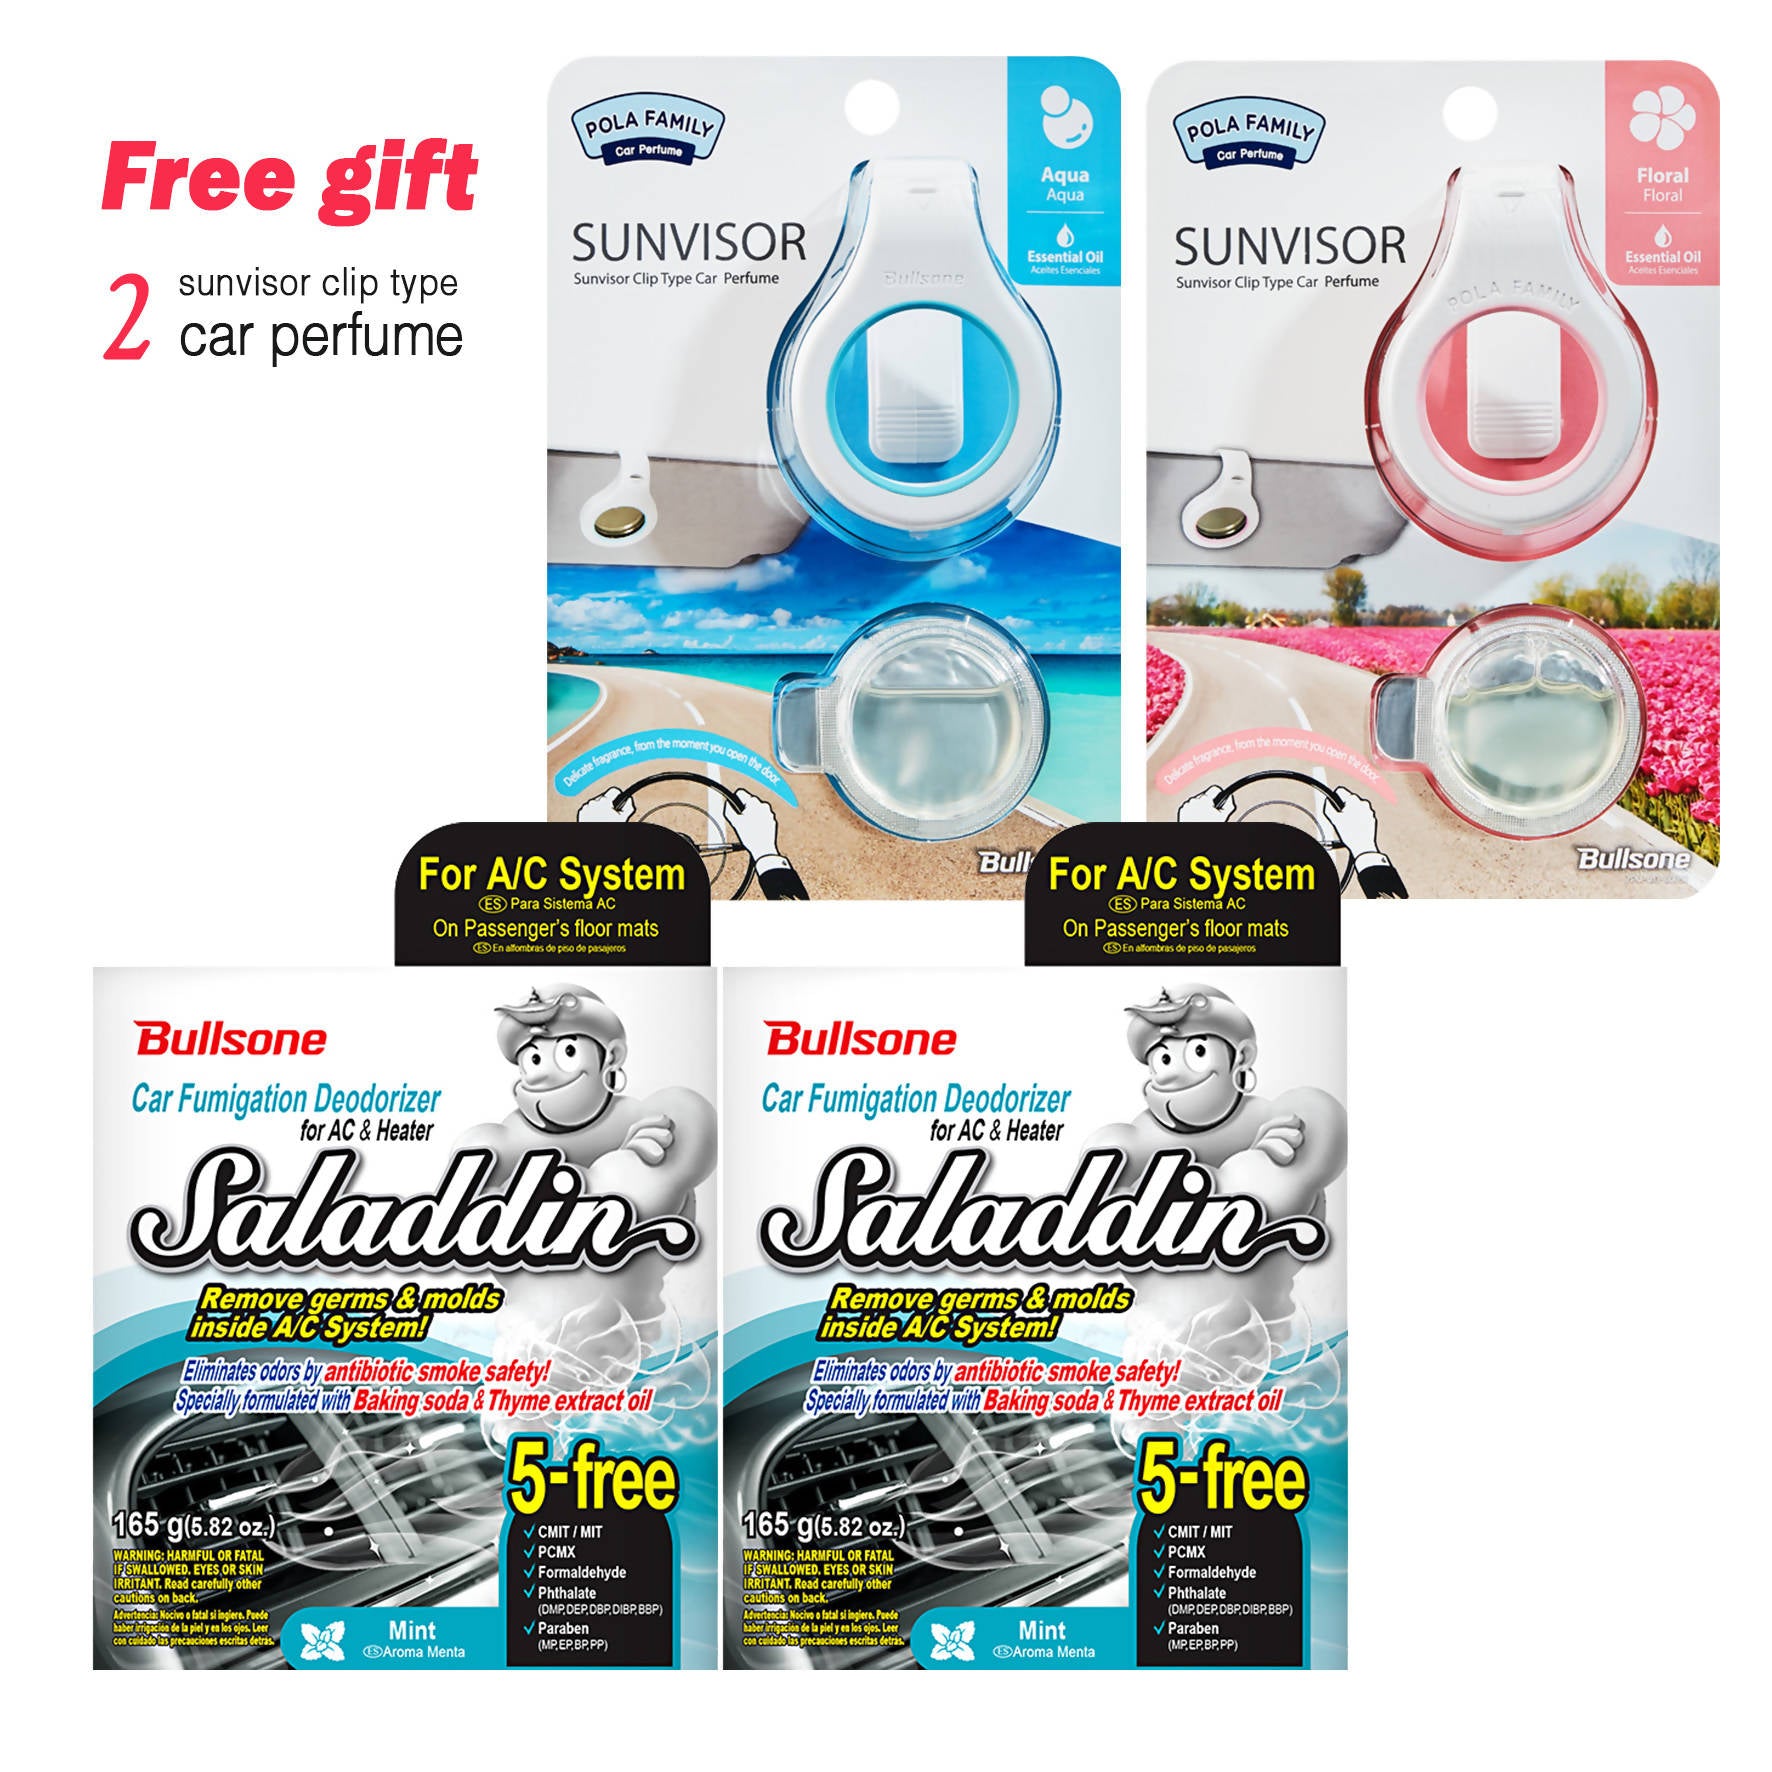 [10% OFF LIMITED TIME ONLY] Bullsone Saladdin Car Fumigation Deodorizer for A/C & Heater system (2 PACKS) +Free gift (2 Pola Family Sunvior Clip Type Perfume)